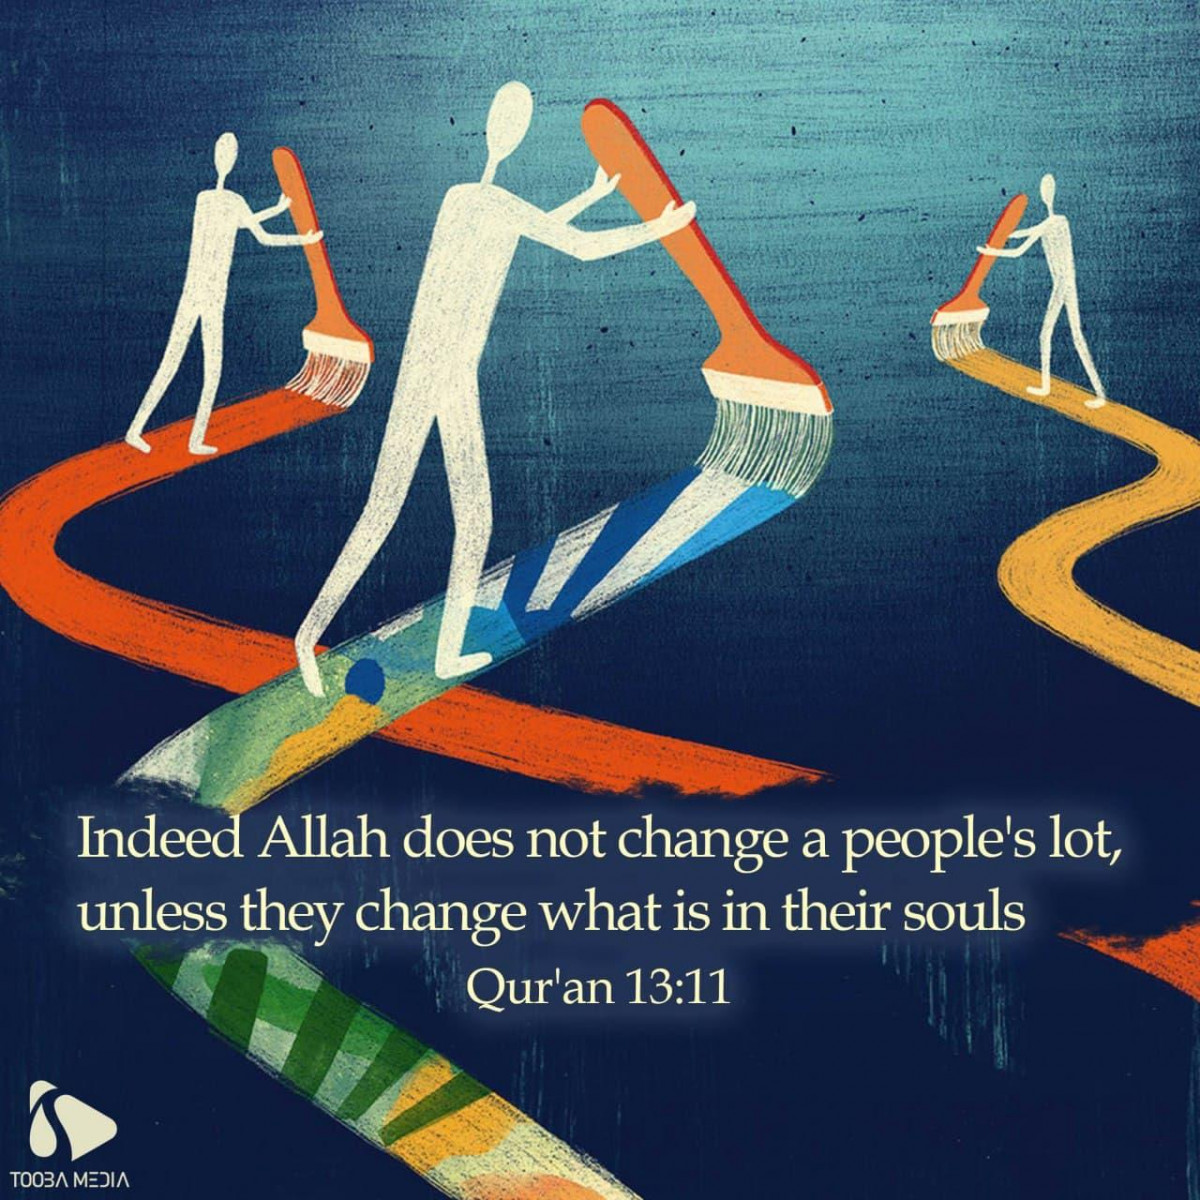 Indeed Allah does not change a people's lot, unless they change what is in their souls